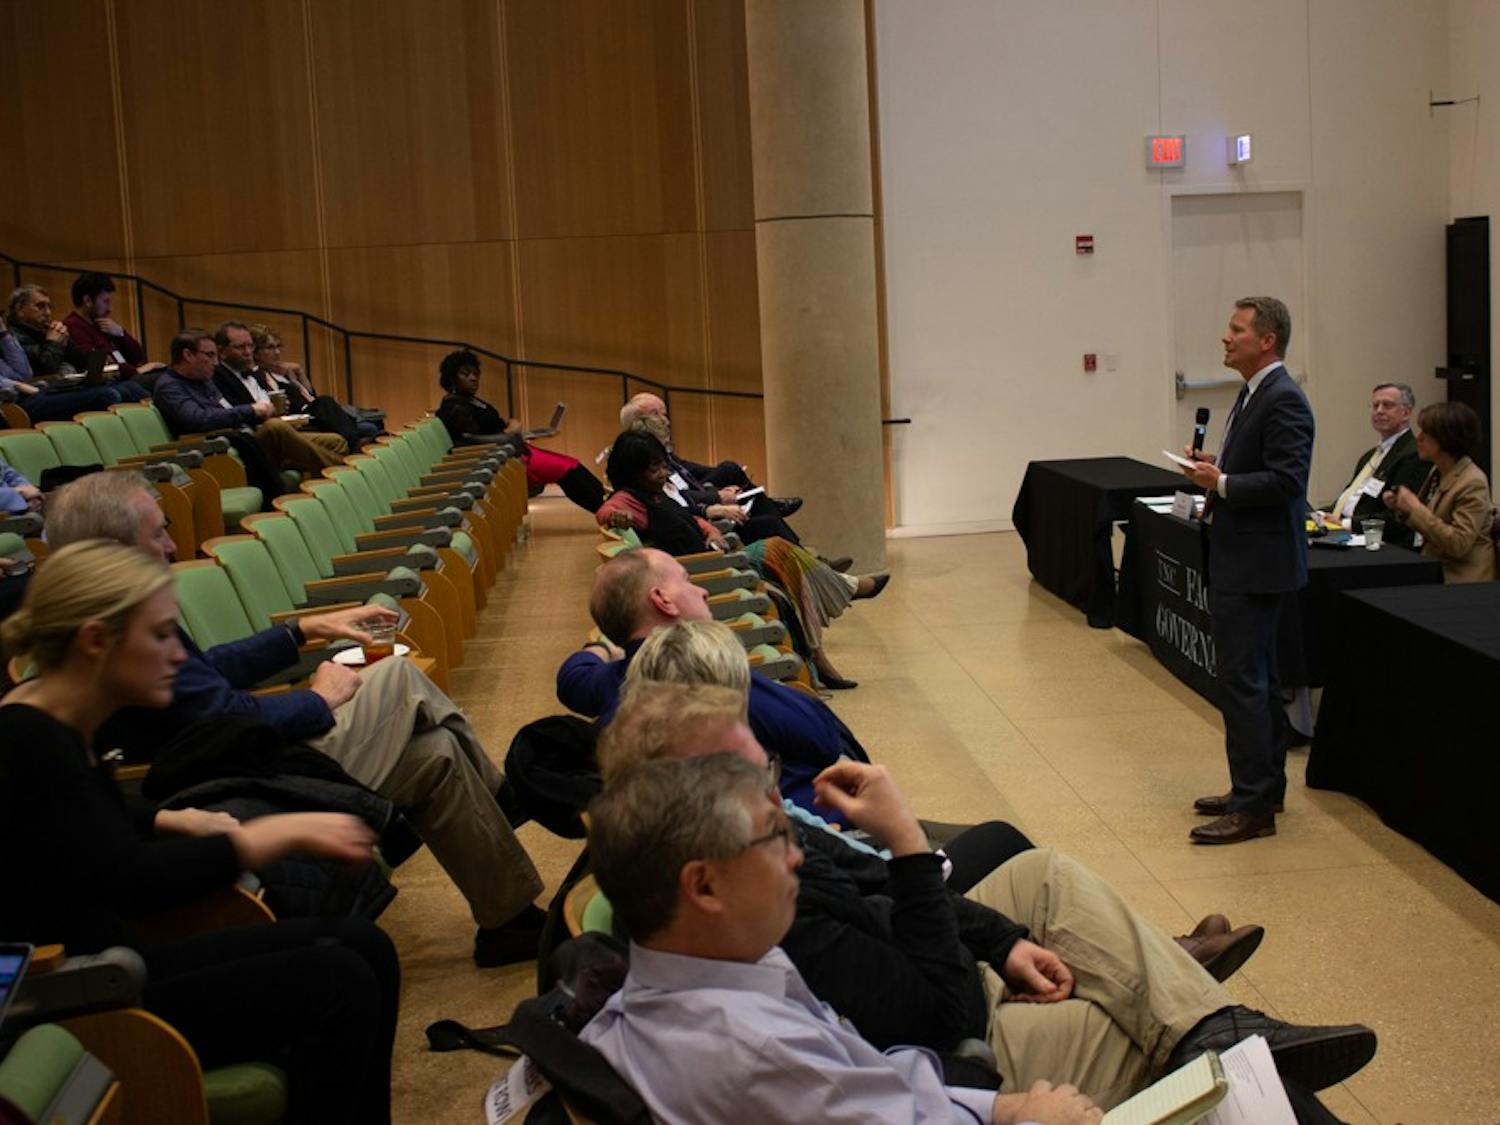 Interim Chancellor Kevin Guskiewicz gave updates about the University at the meeting of the Faculty Council and the General Faculty in Genome Sciences Building on Friday, March 8, 2019.  He discussed the naming of the Adams School of Dentistry, campaign events, the General Education Curriculum and diversity.